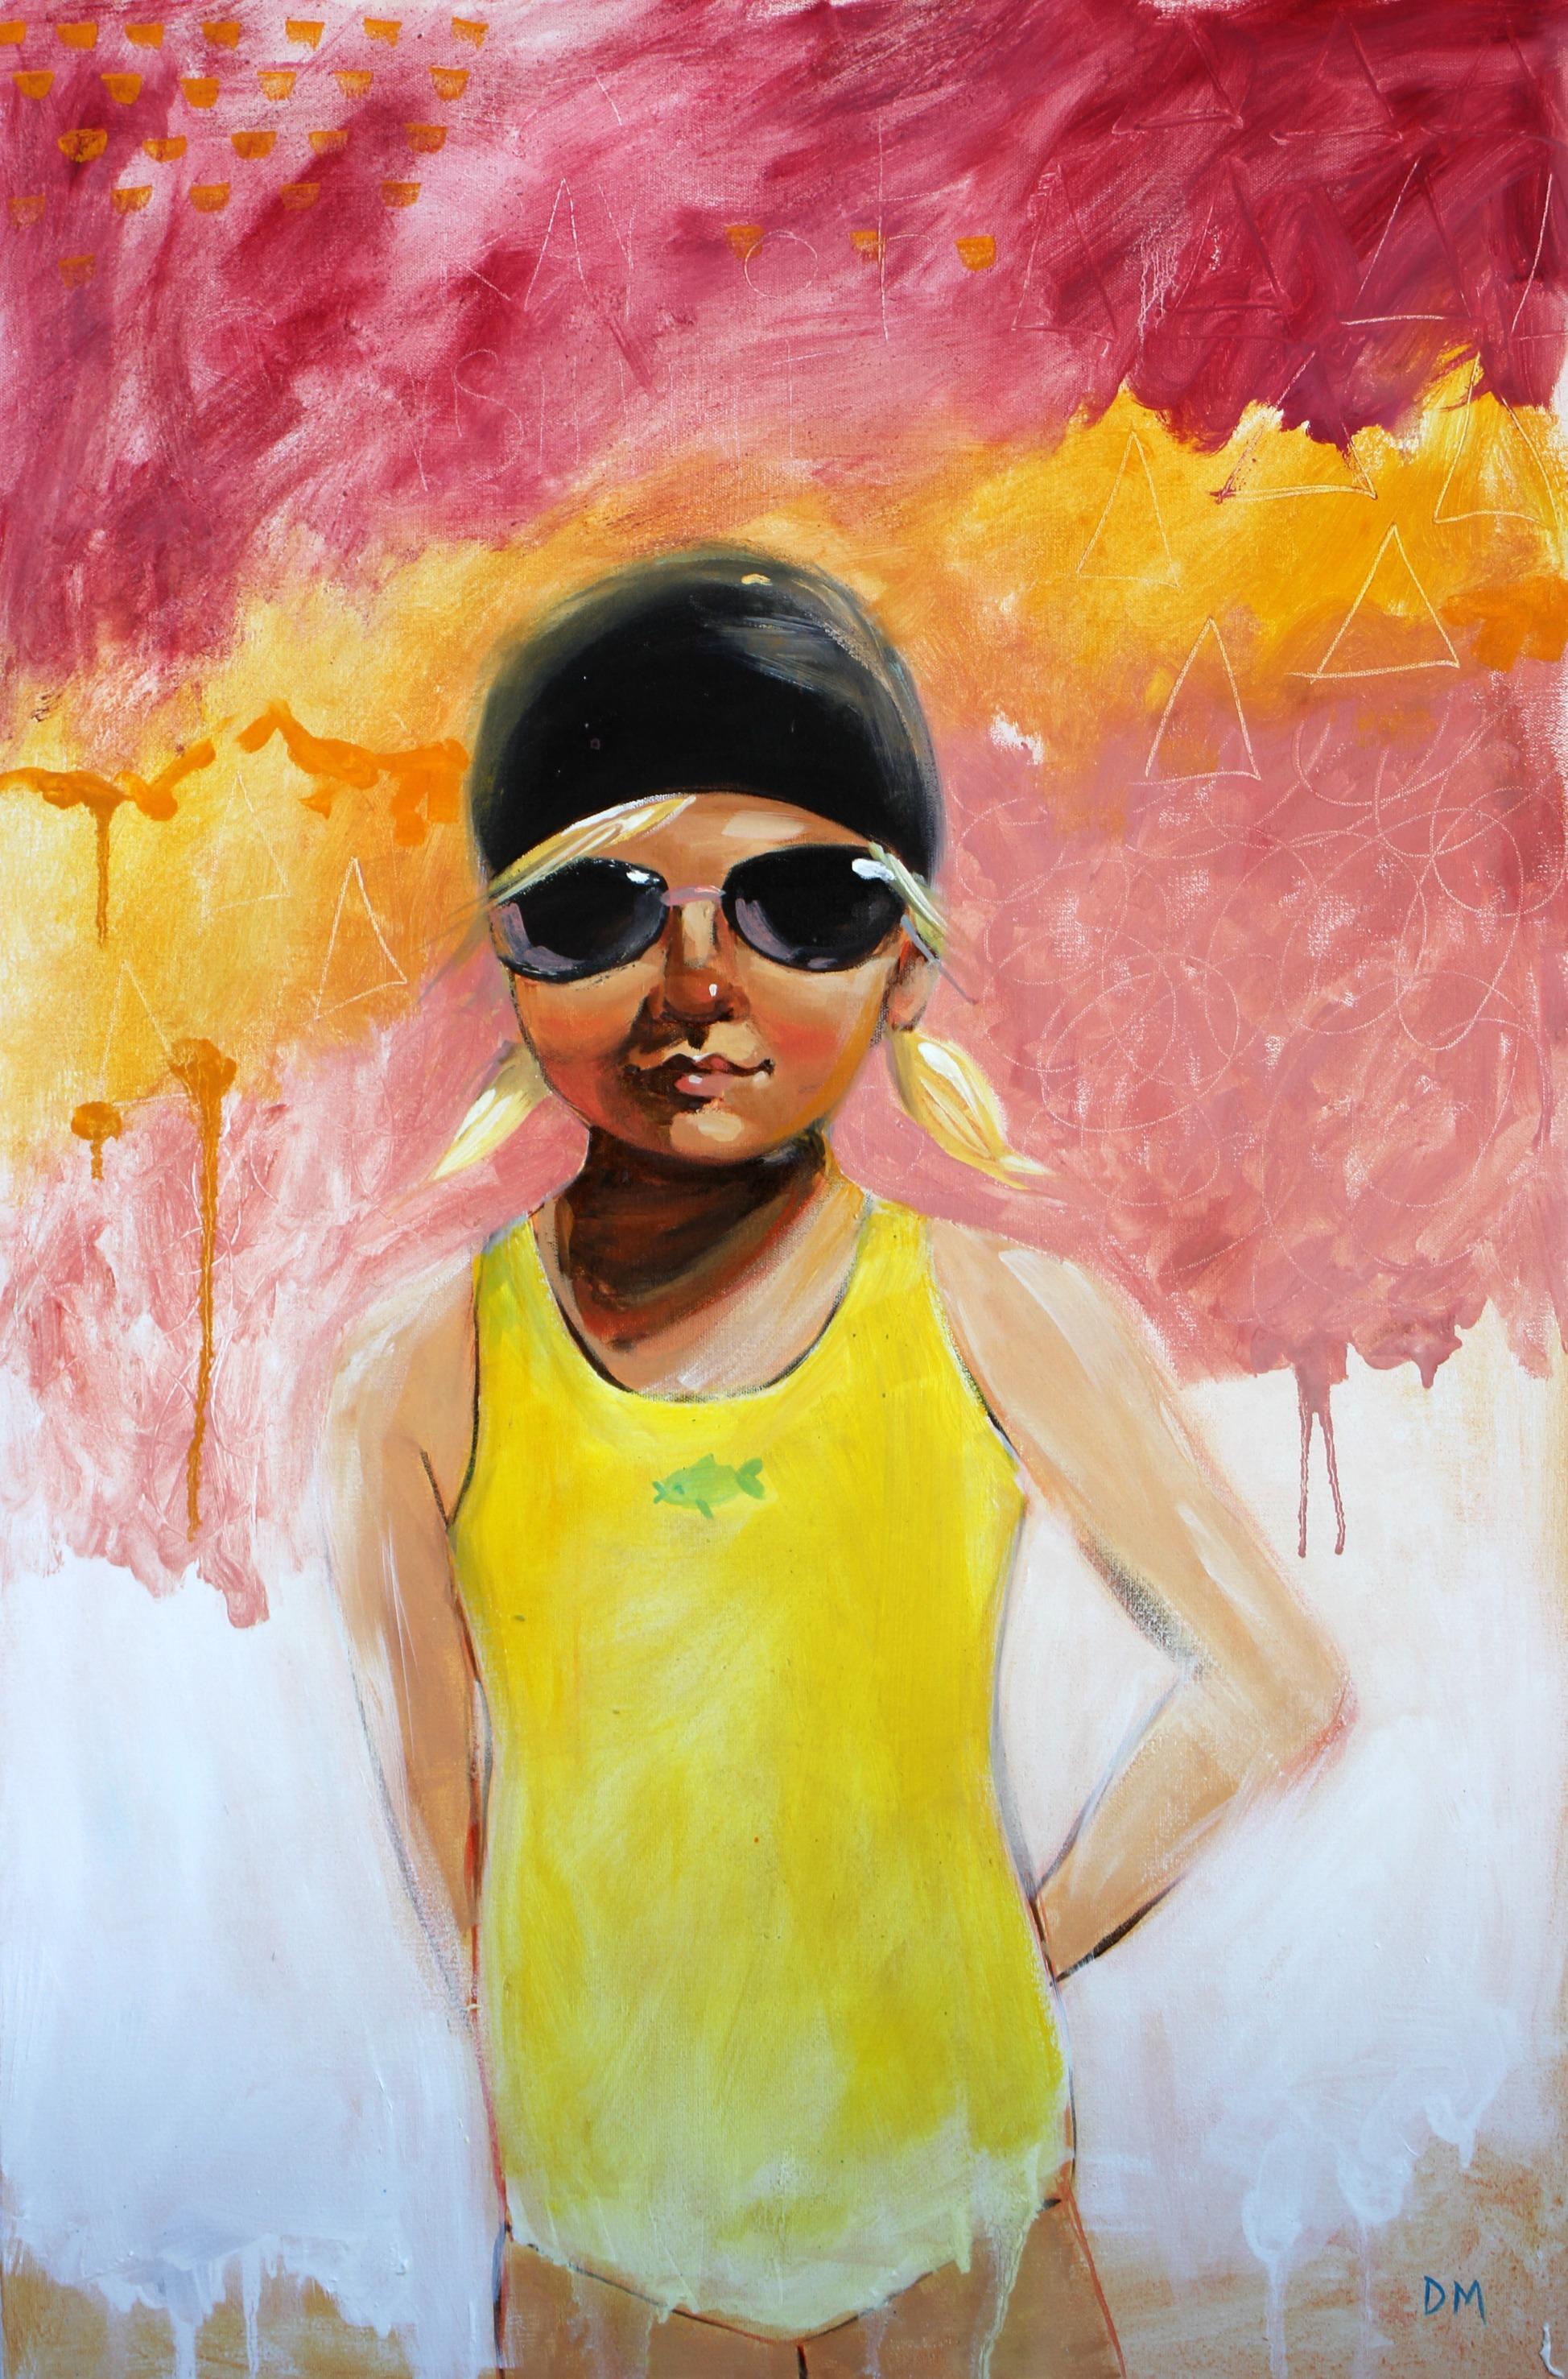 Debbie Miller Figurative Painting - "Sunny" Oil painting of a girl in a yellow swimsuit with red, orange and white 